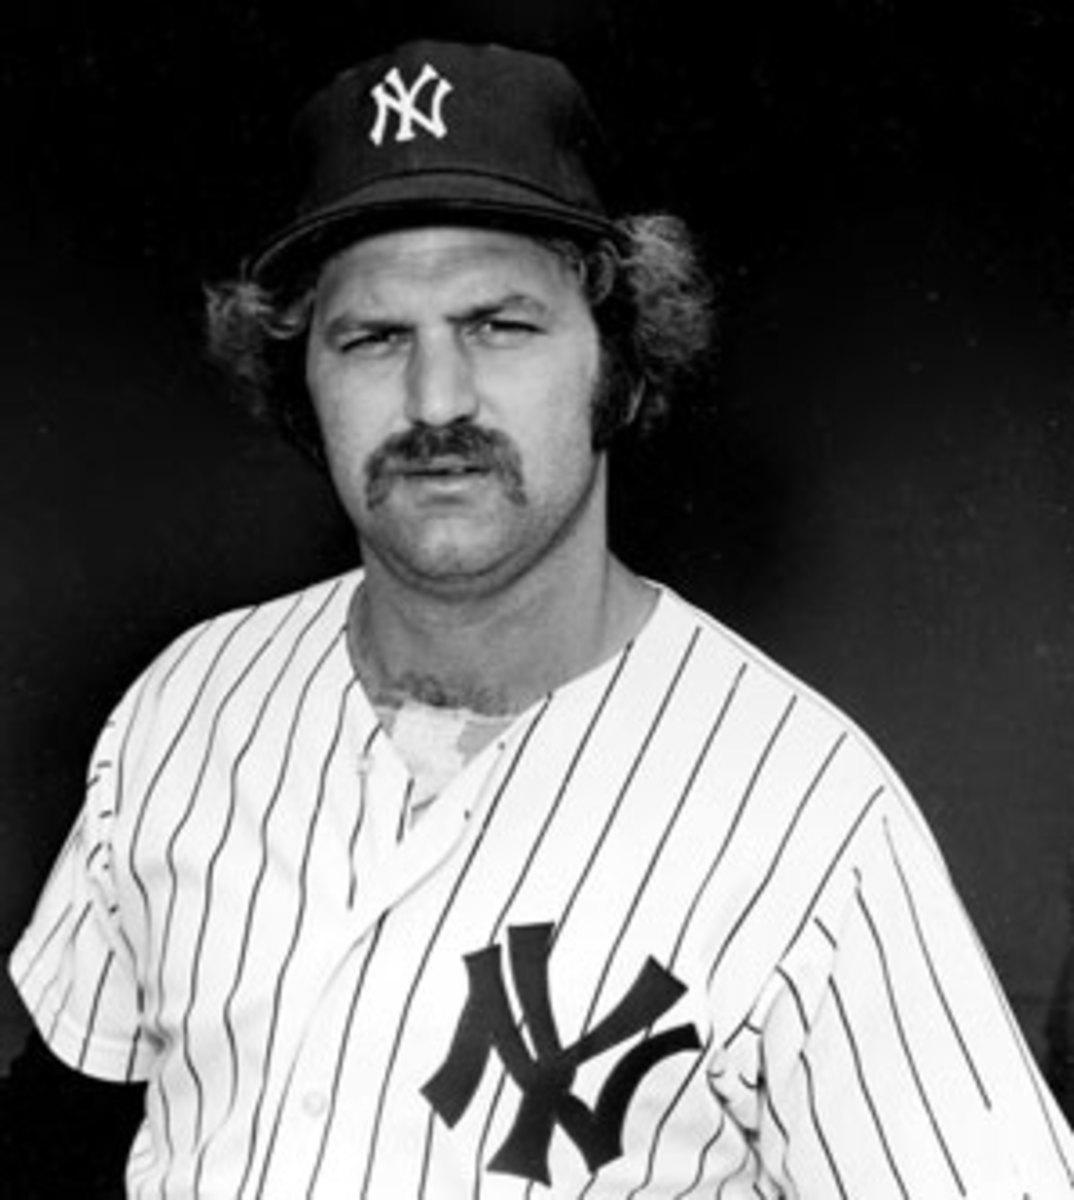 Jeff Pearlman: Book reveals different side of former Yankee great Thurman  Munson - Sports Illustrated